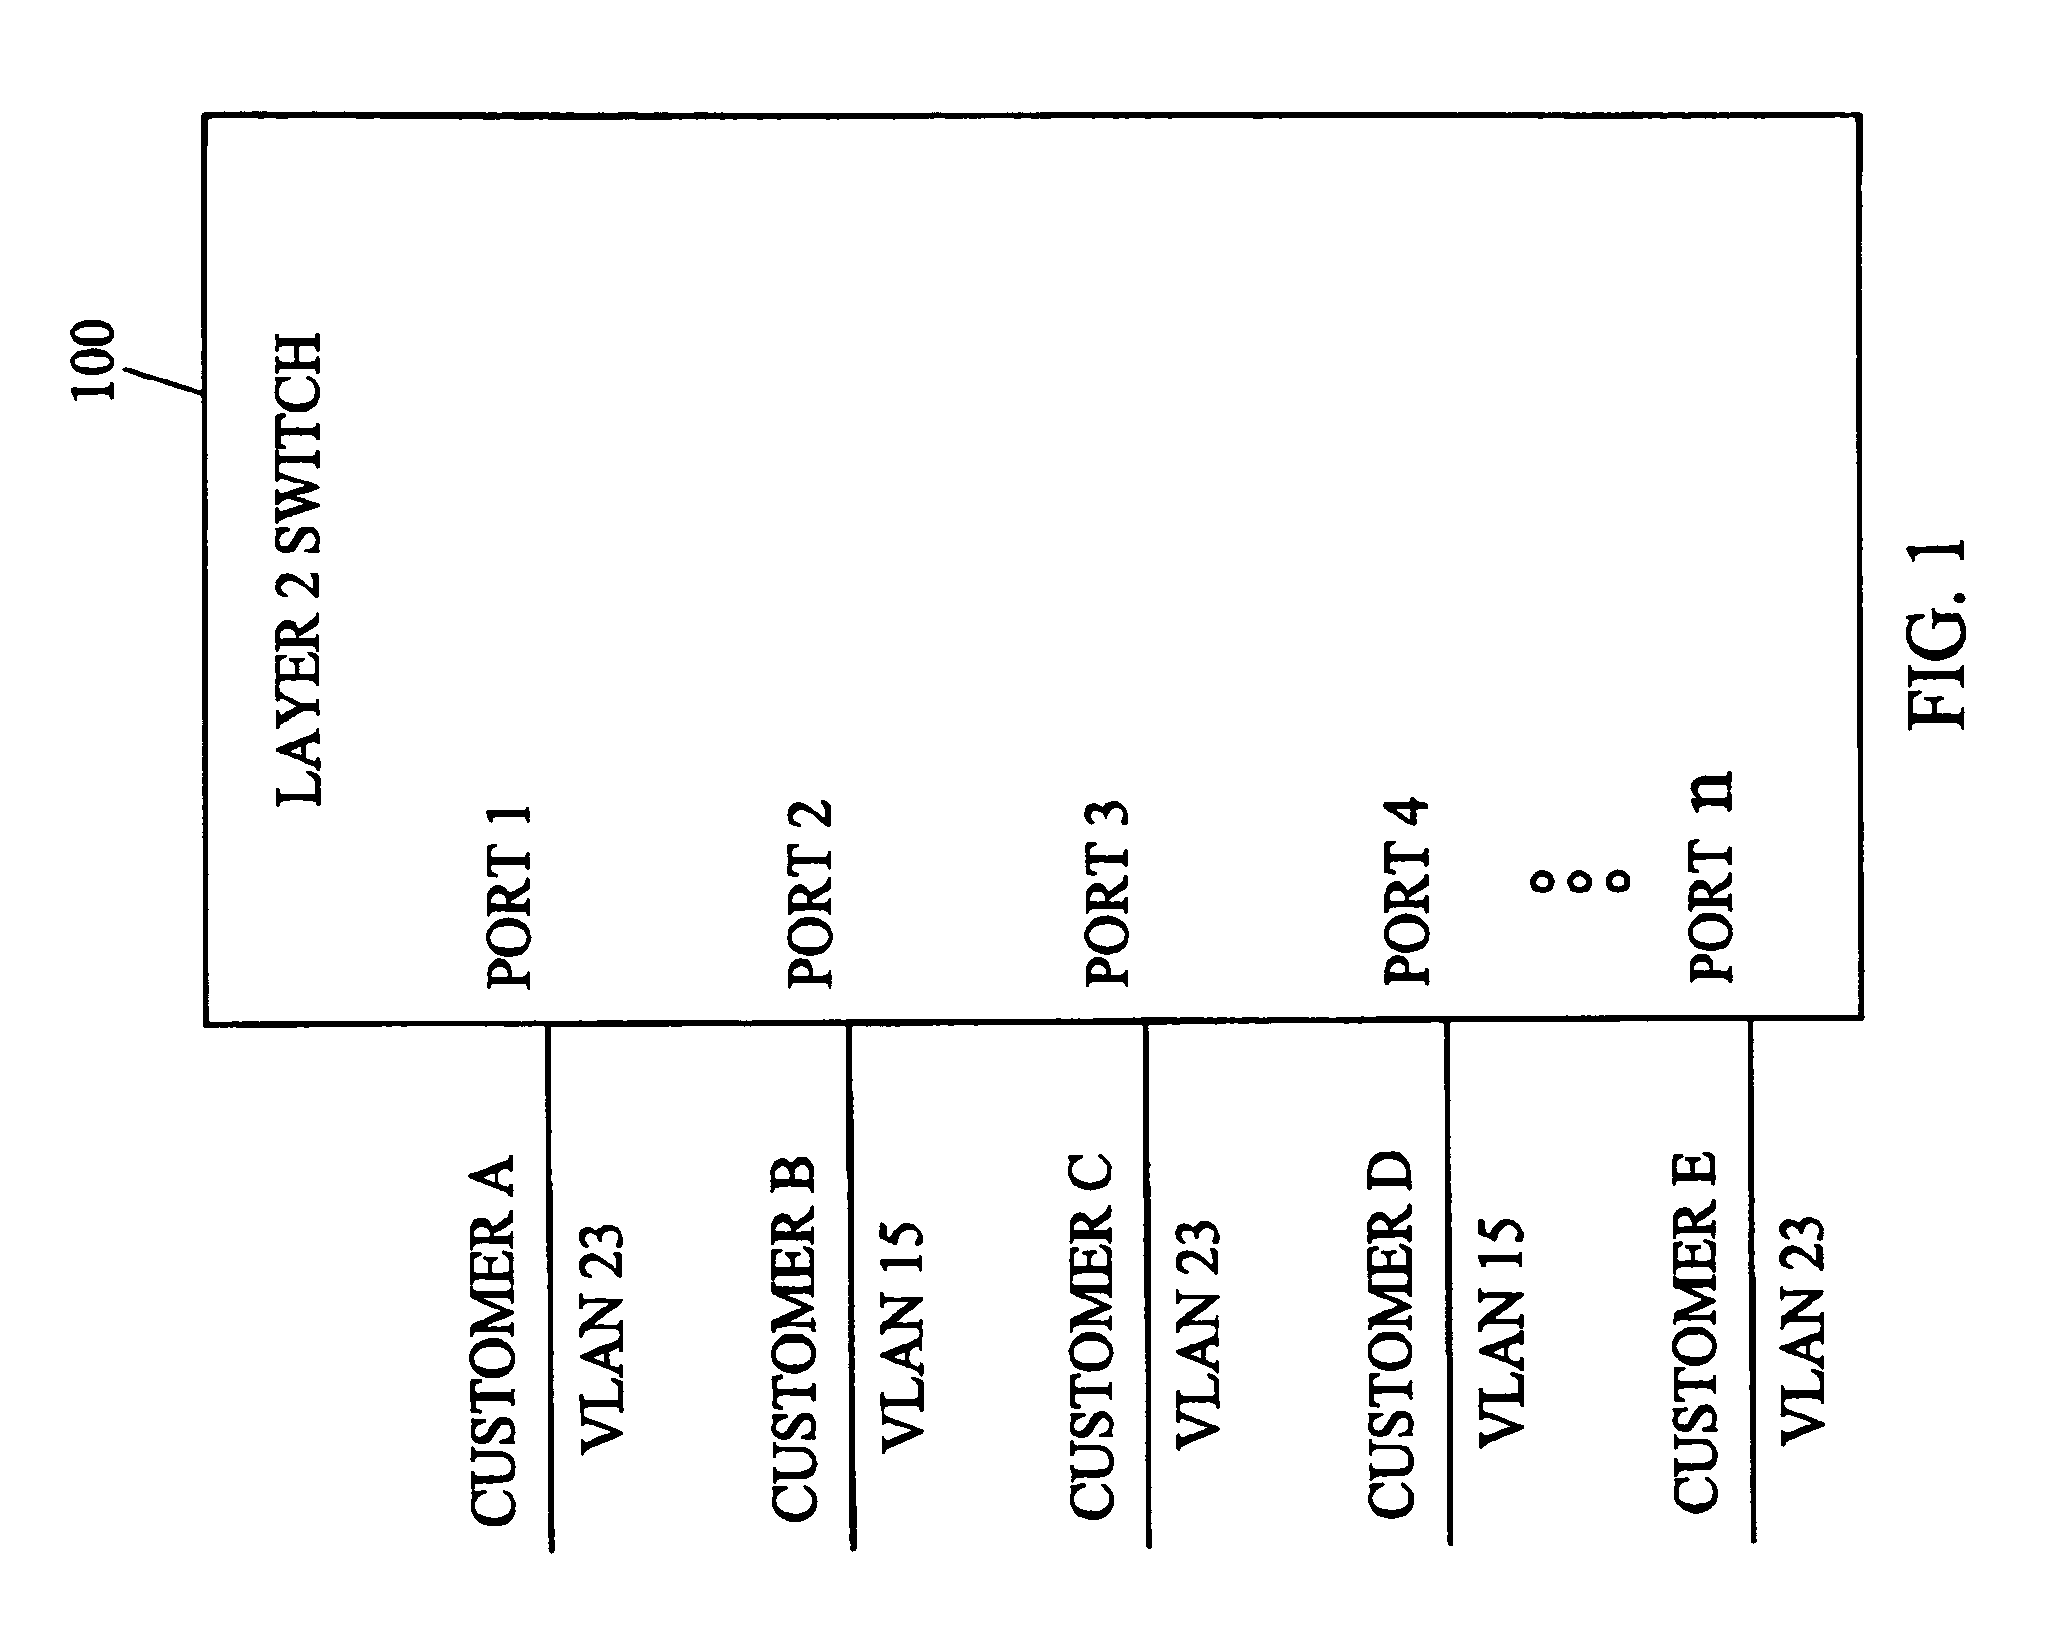 Methods and systems for selectively processing virtual local area network (VLAN) traffic from different networks while allowing flexible VLAN identifier assignment